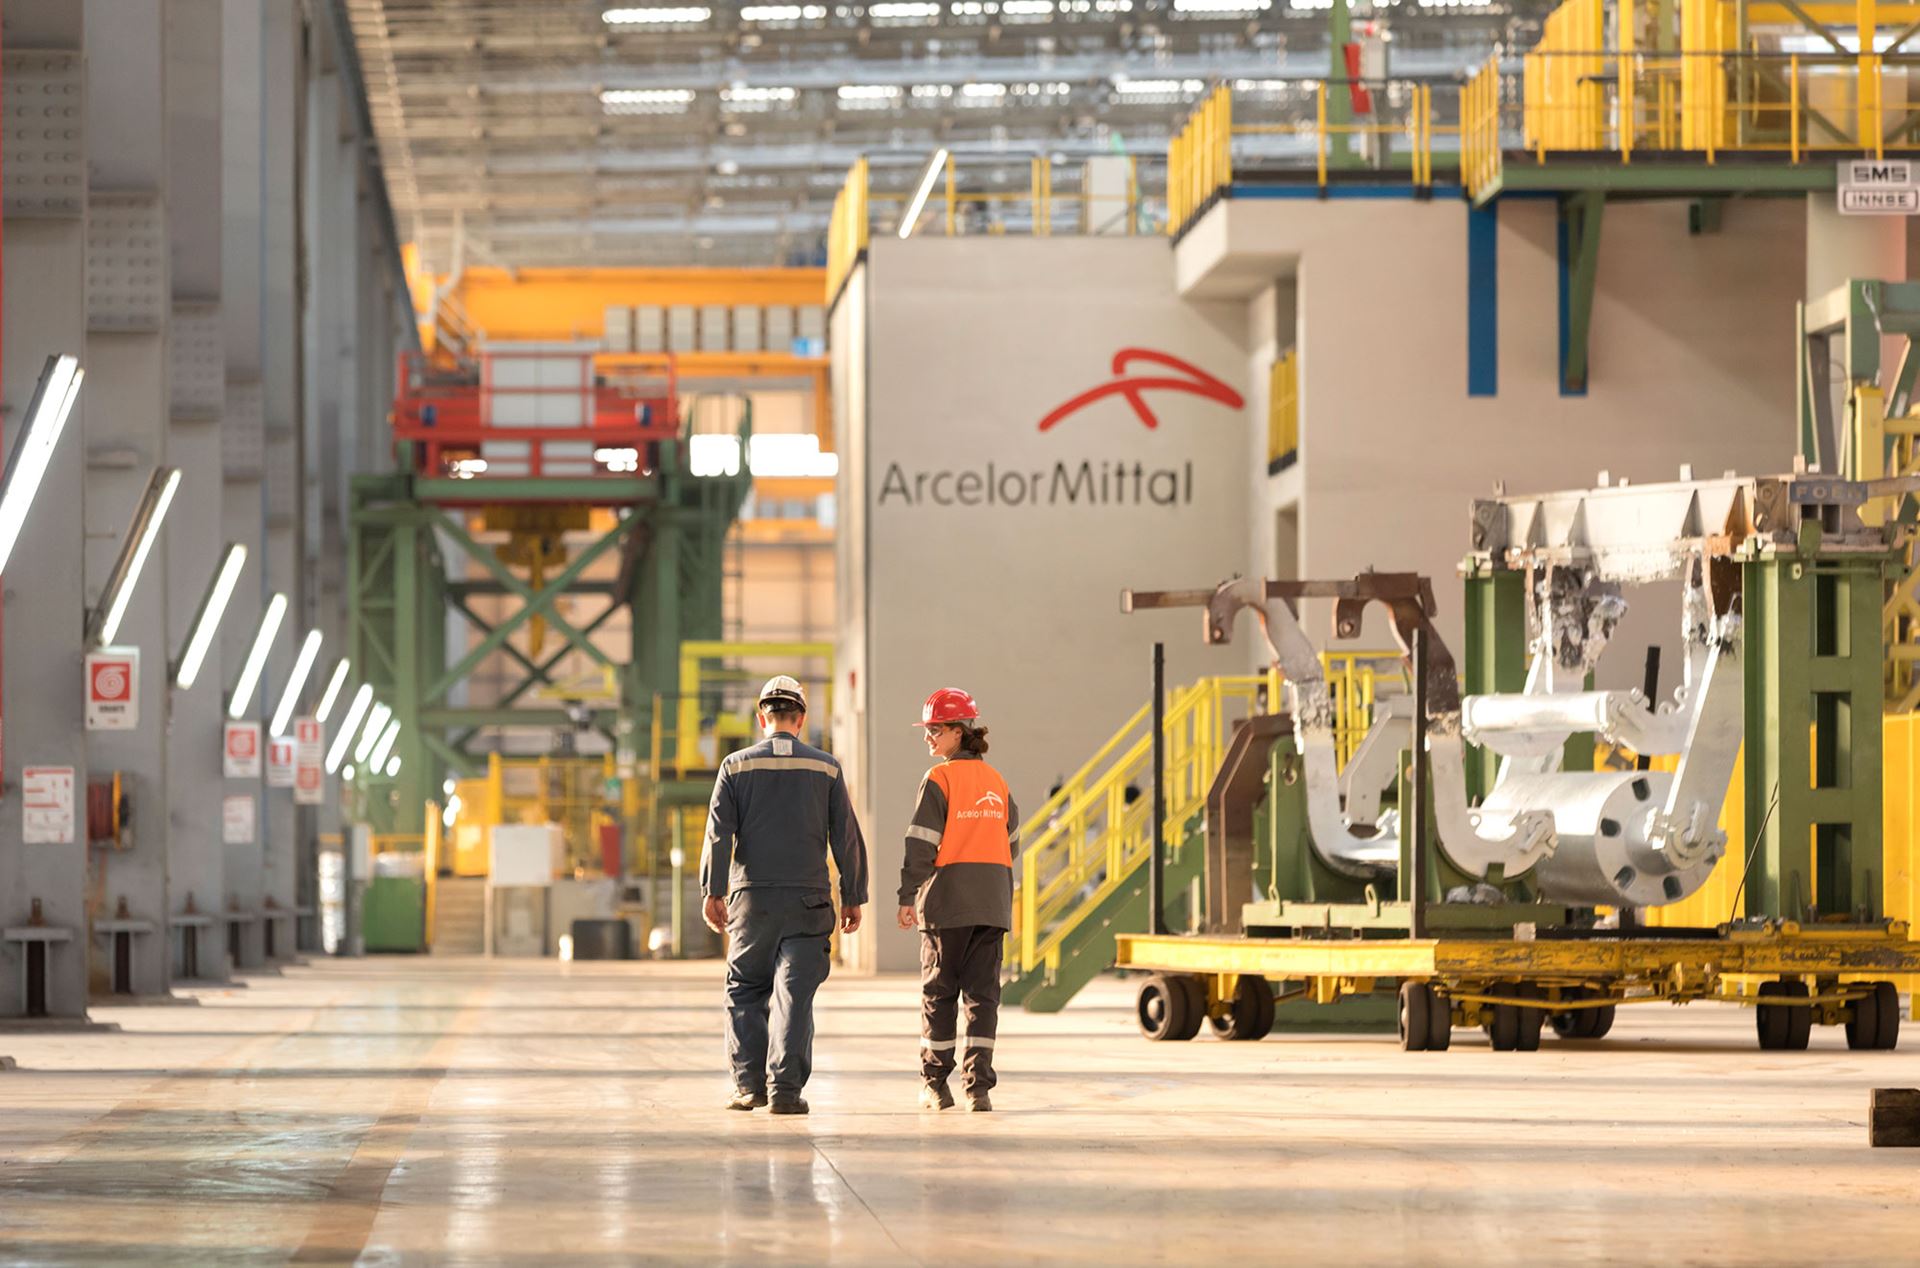 McPhy will supply electrolyzer to Germany's ArcelorMittal